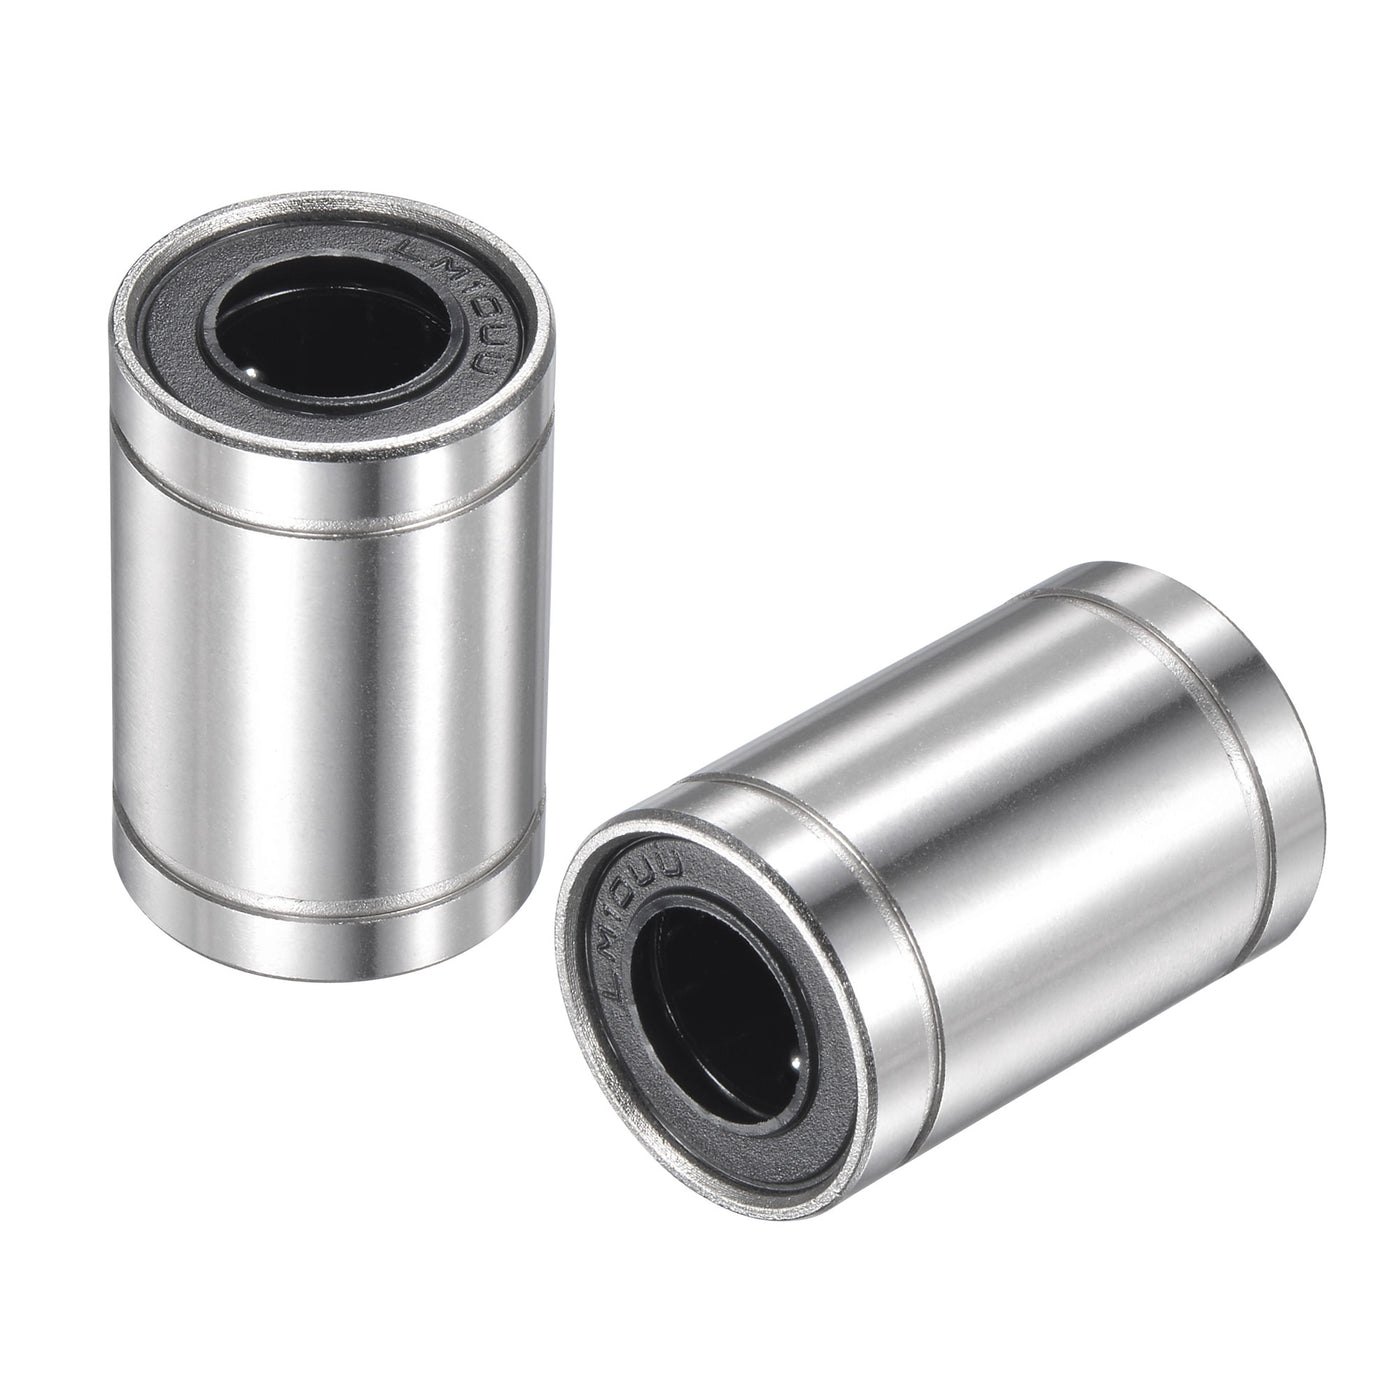 uxcell Uxcell Linear Ball Bearings Nickel Plated for 3D Printers